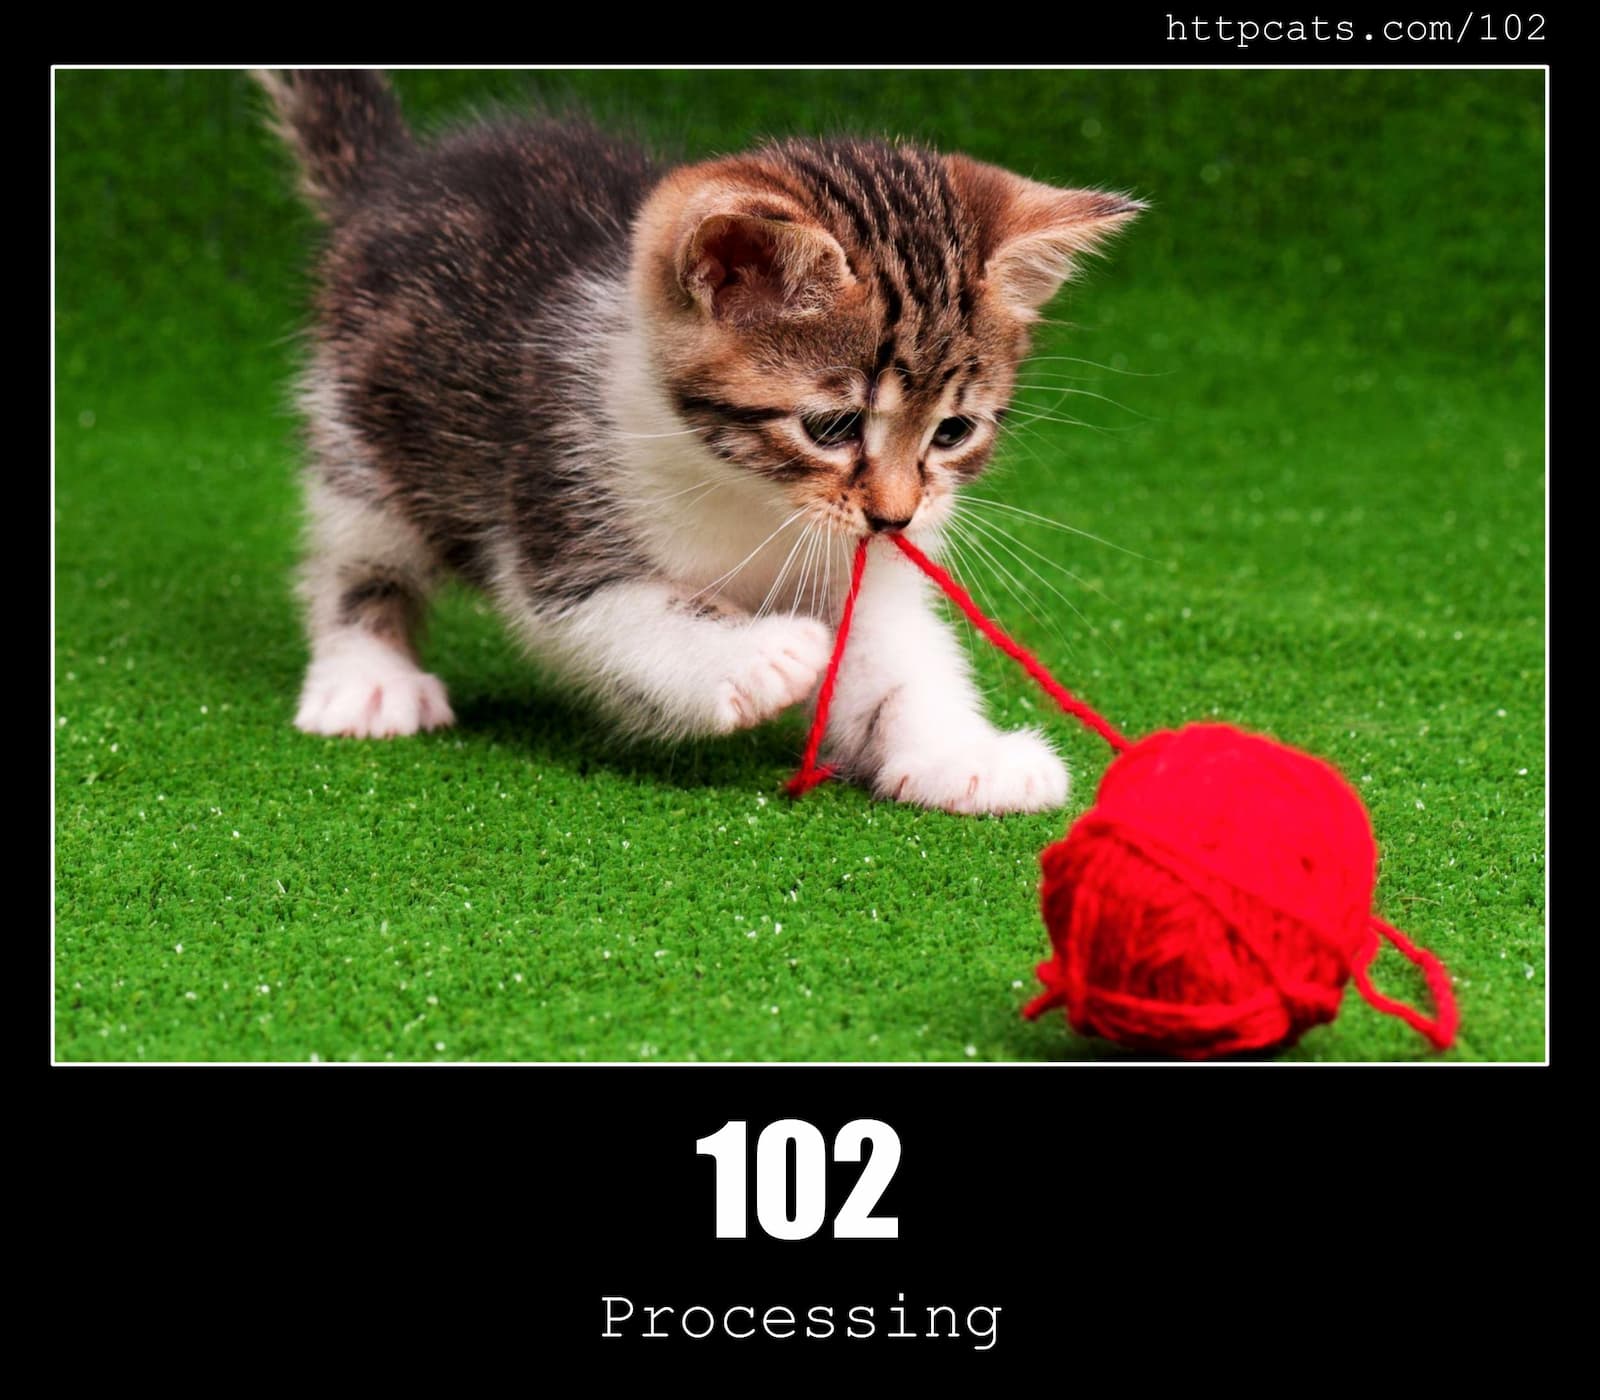 HTTP Status Code 102 Processing & Cats